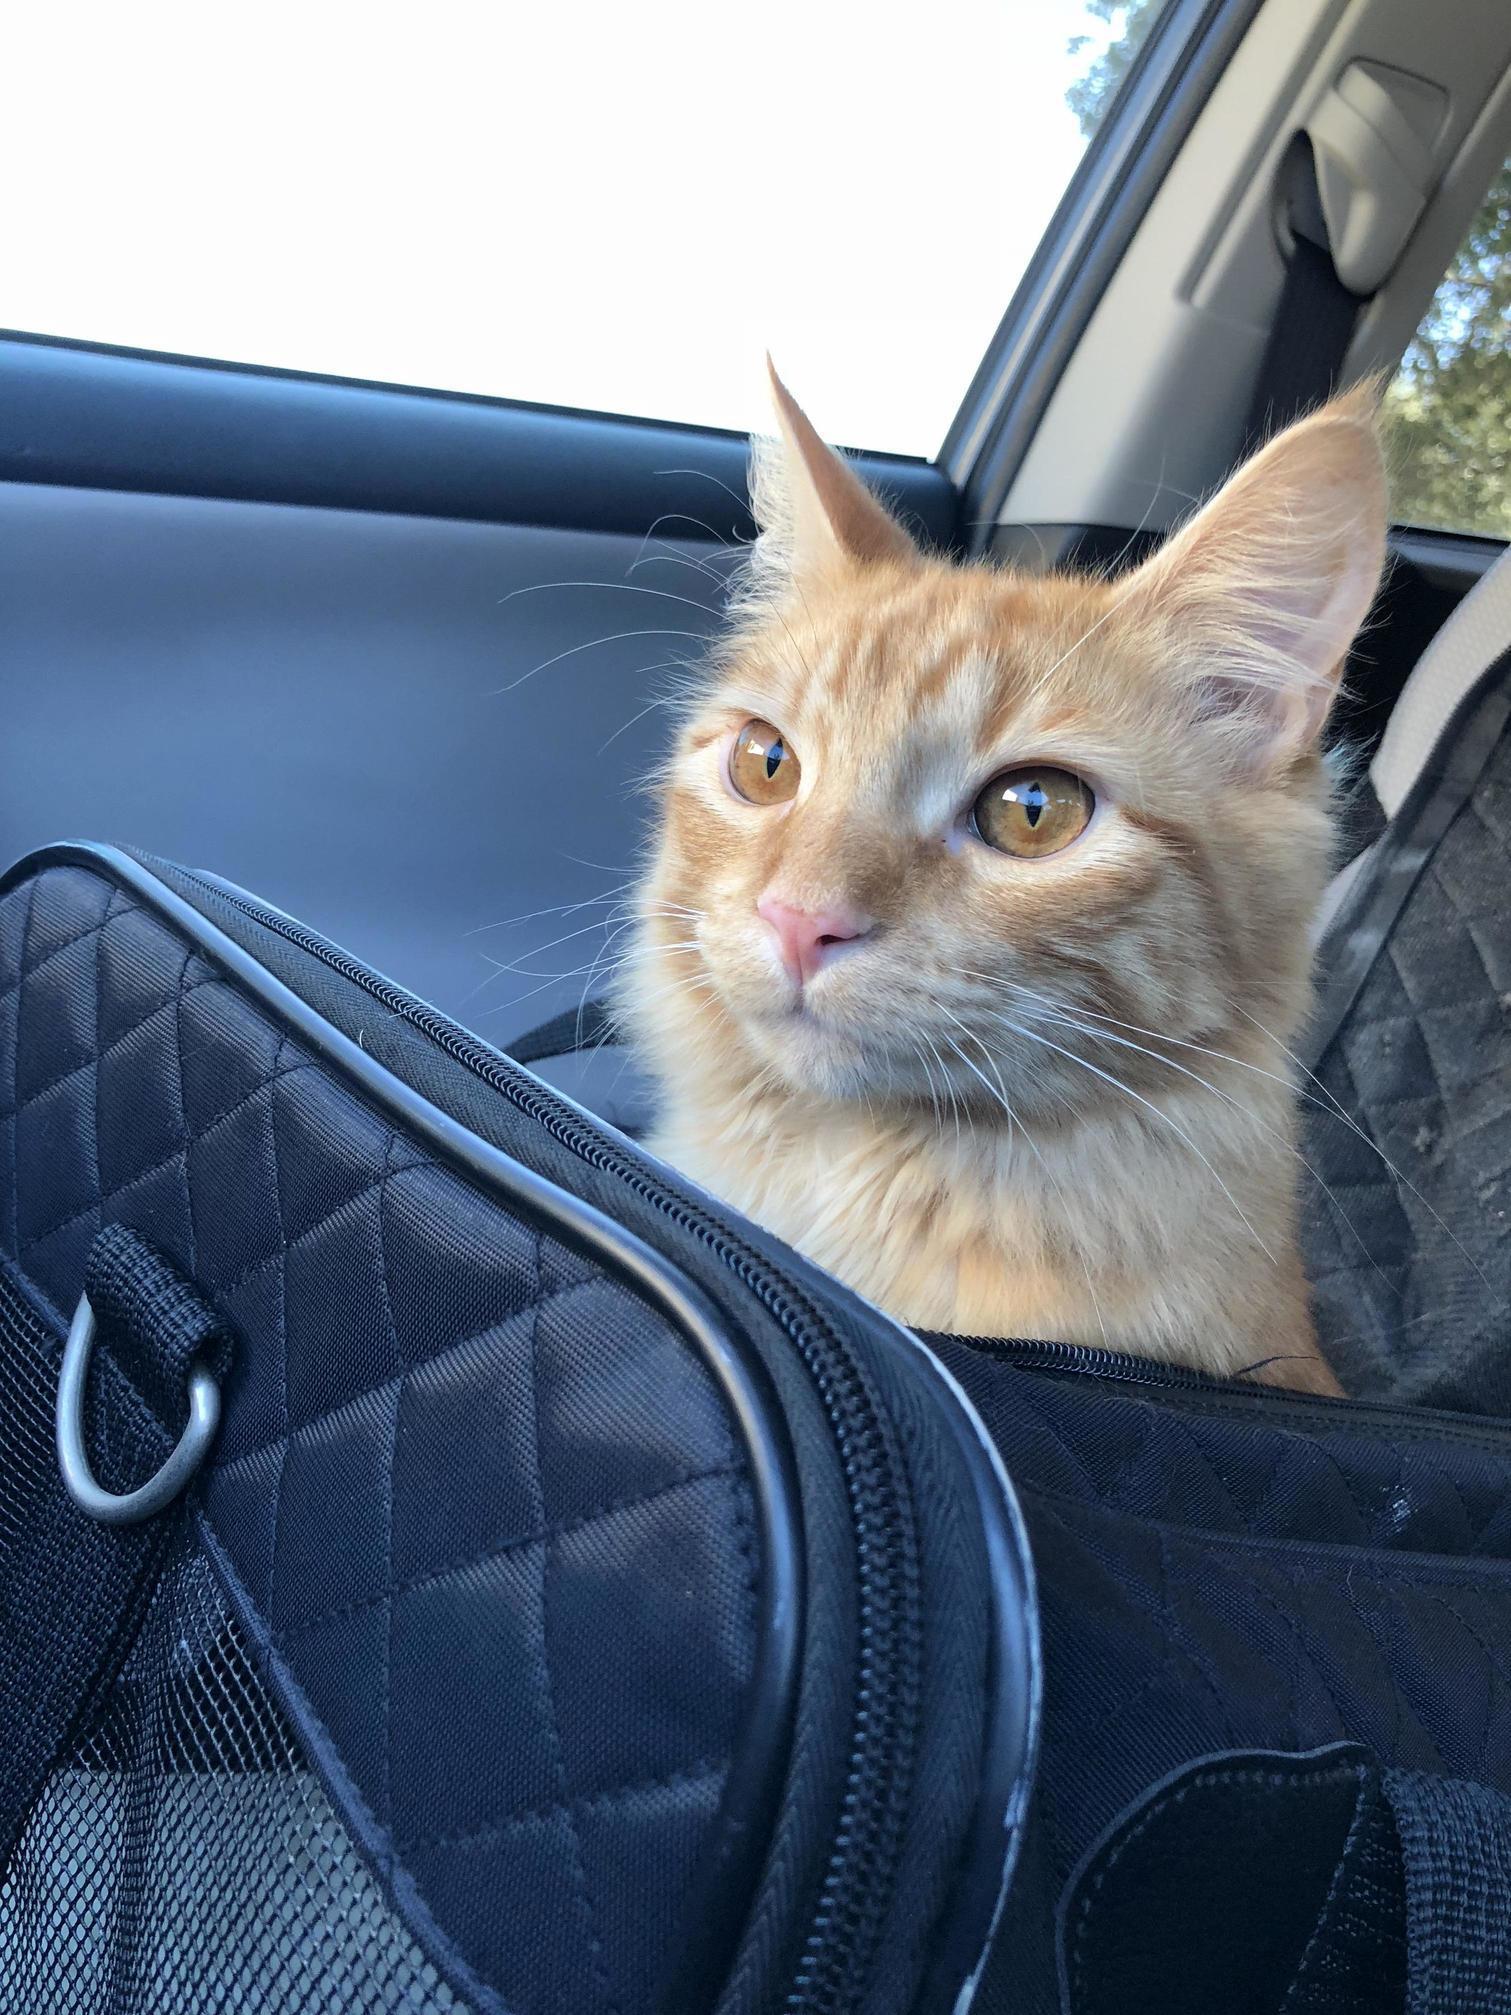 Jasper loves to get in his carrier and go on car rides.